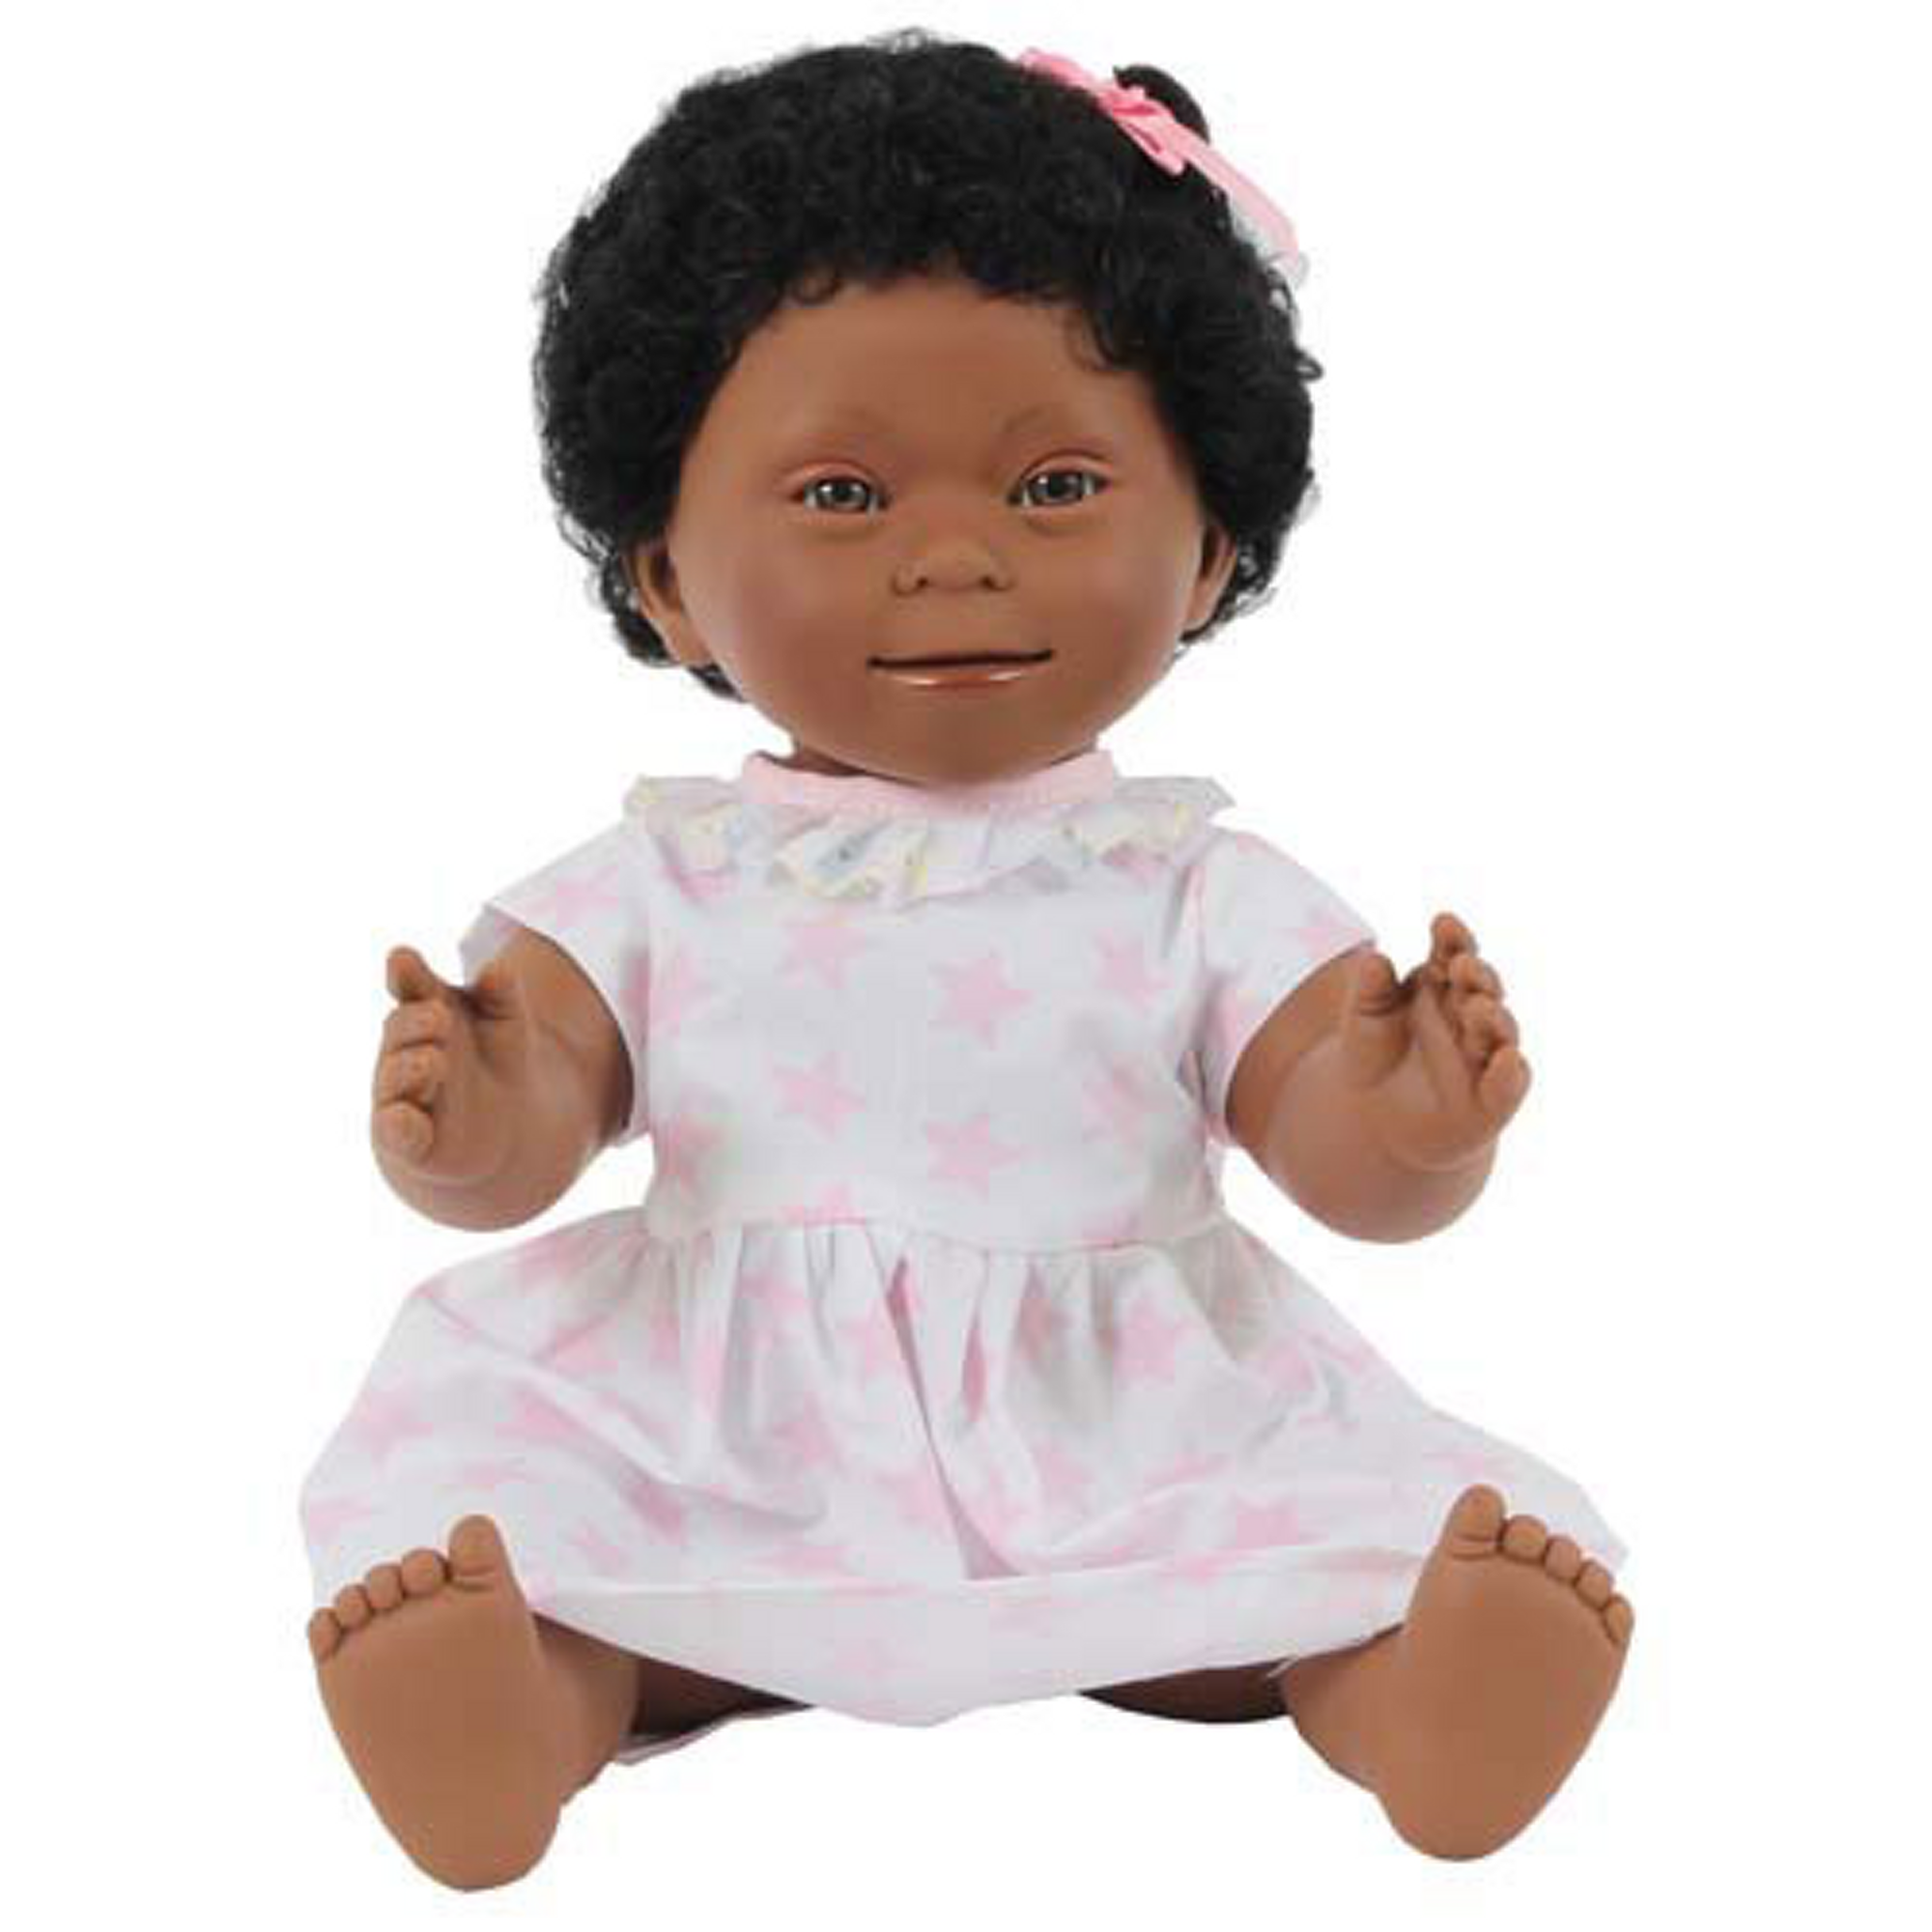 Girl Doll With Downs Syndrome Dark Skin